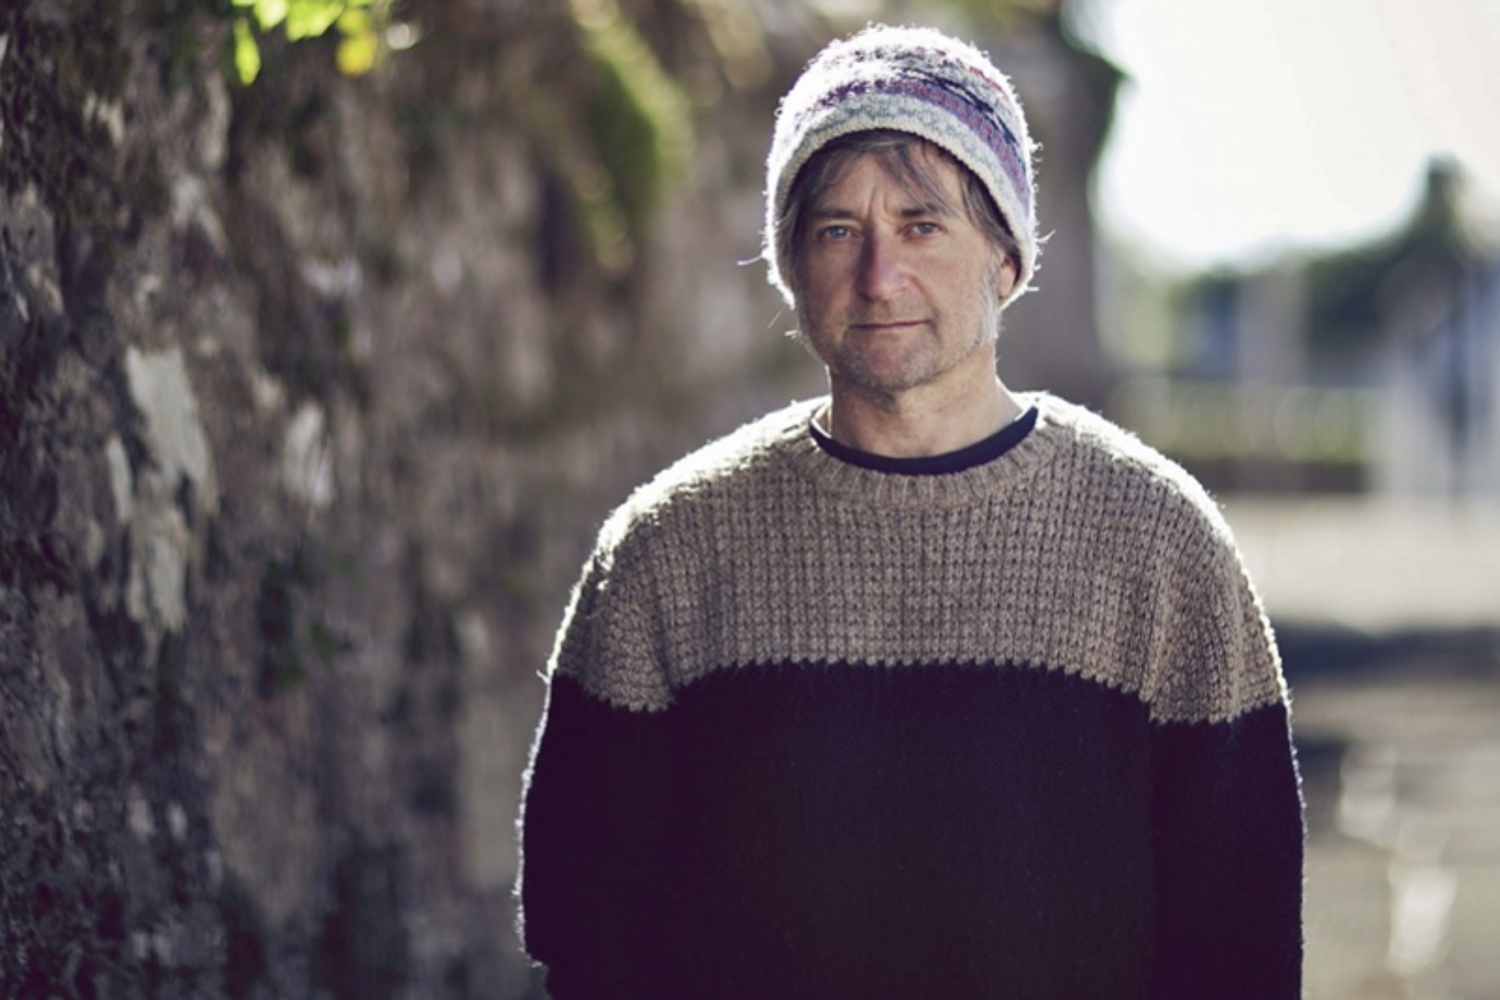 King Creosote returns with two new songs, ‘Susie Mullen’ and ‘Walter de la Nightmare’